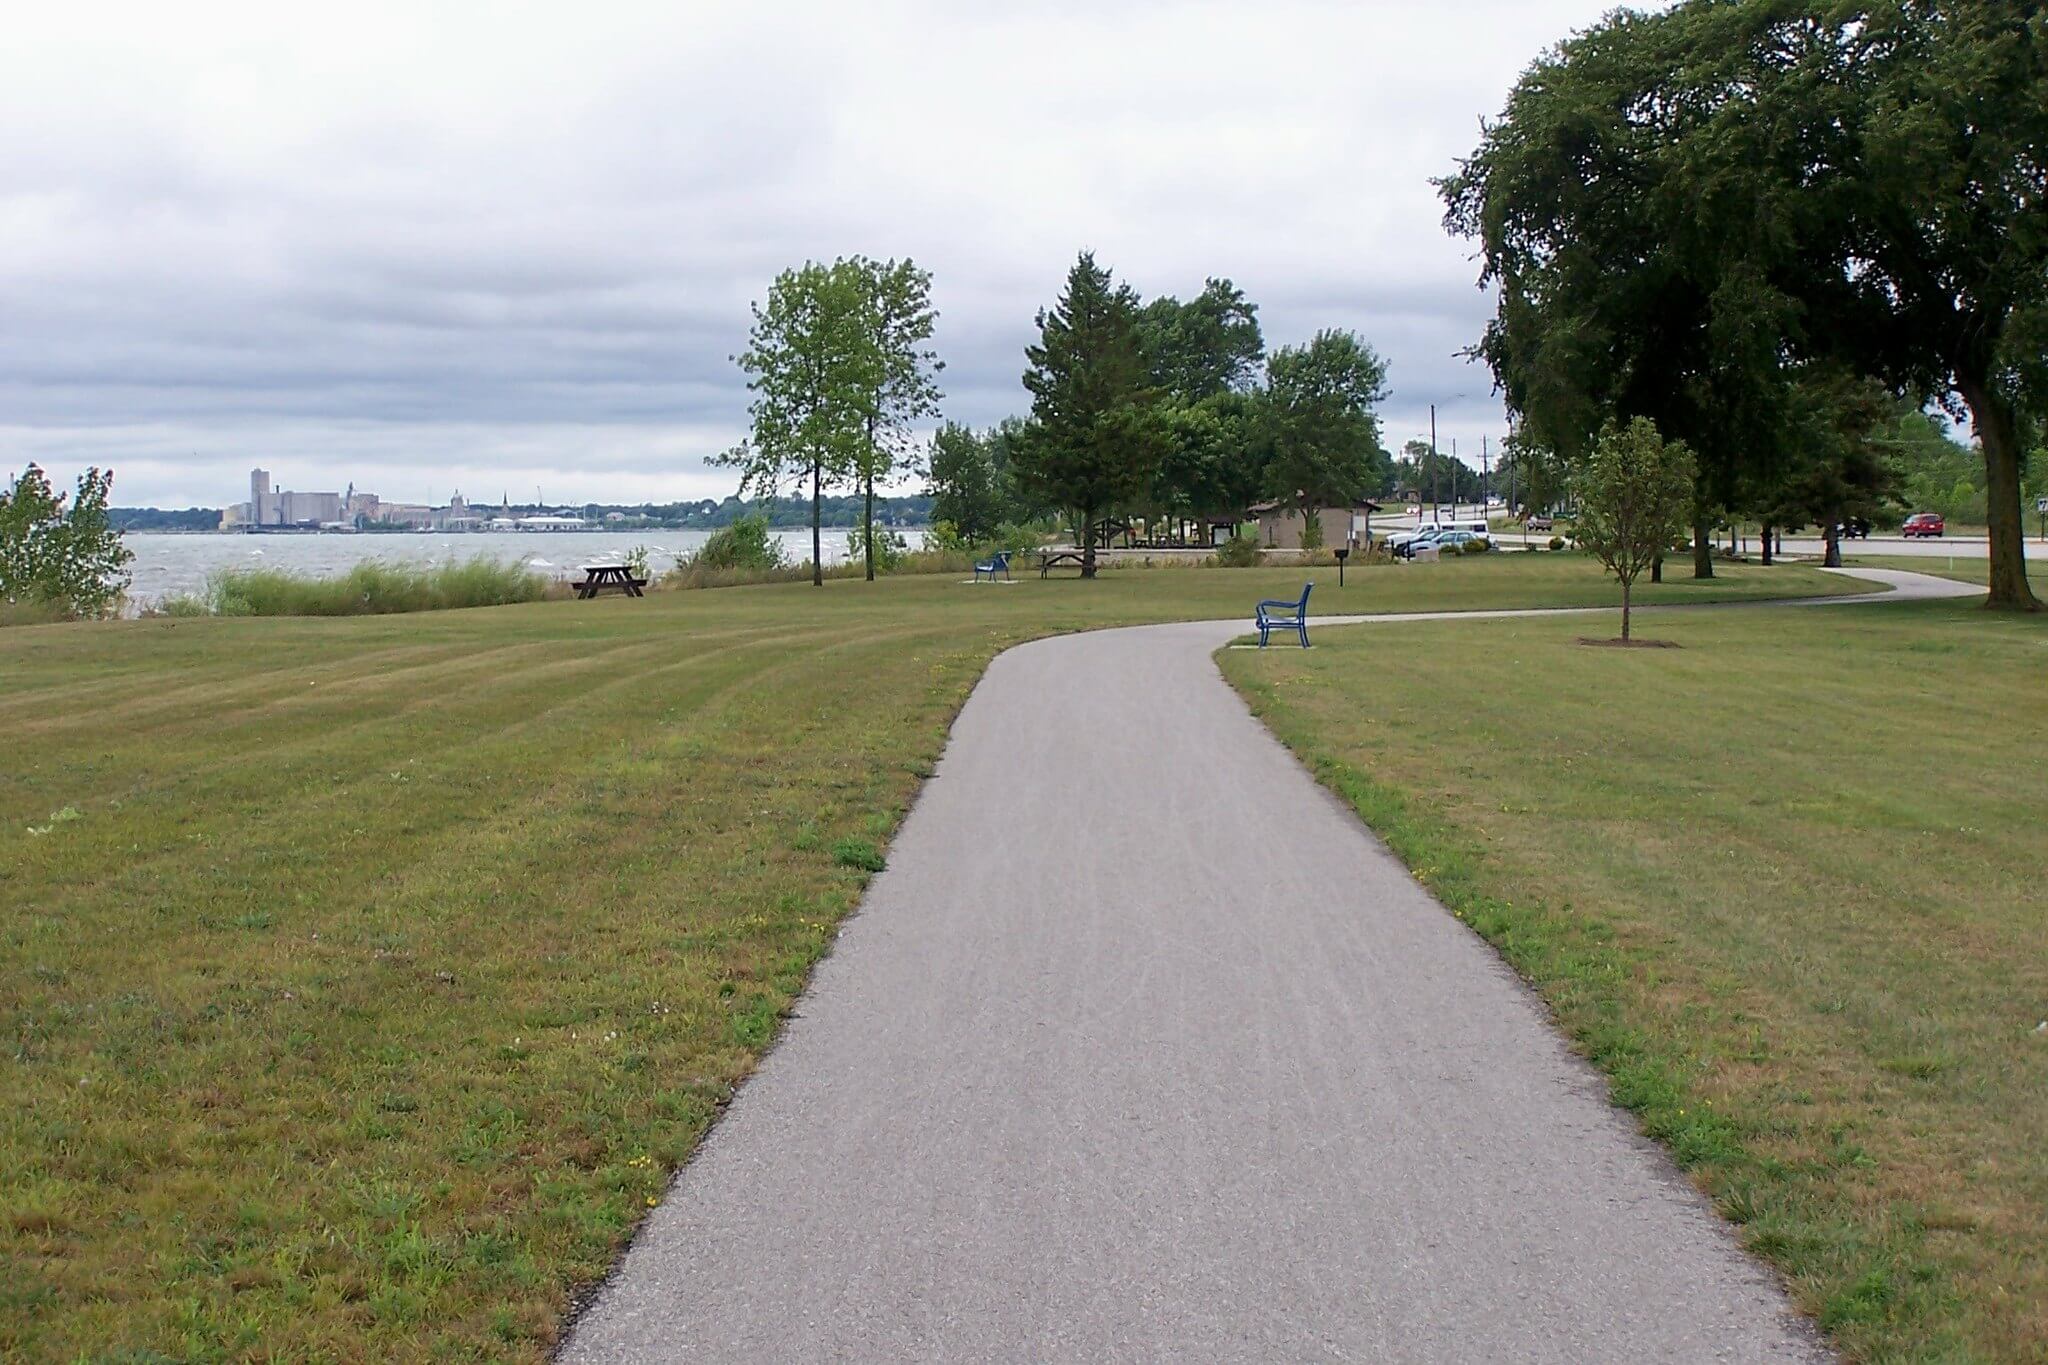 A bike path in Manitowoc, supported by the Knowles-Nelson Stewardship Program